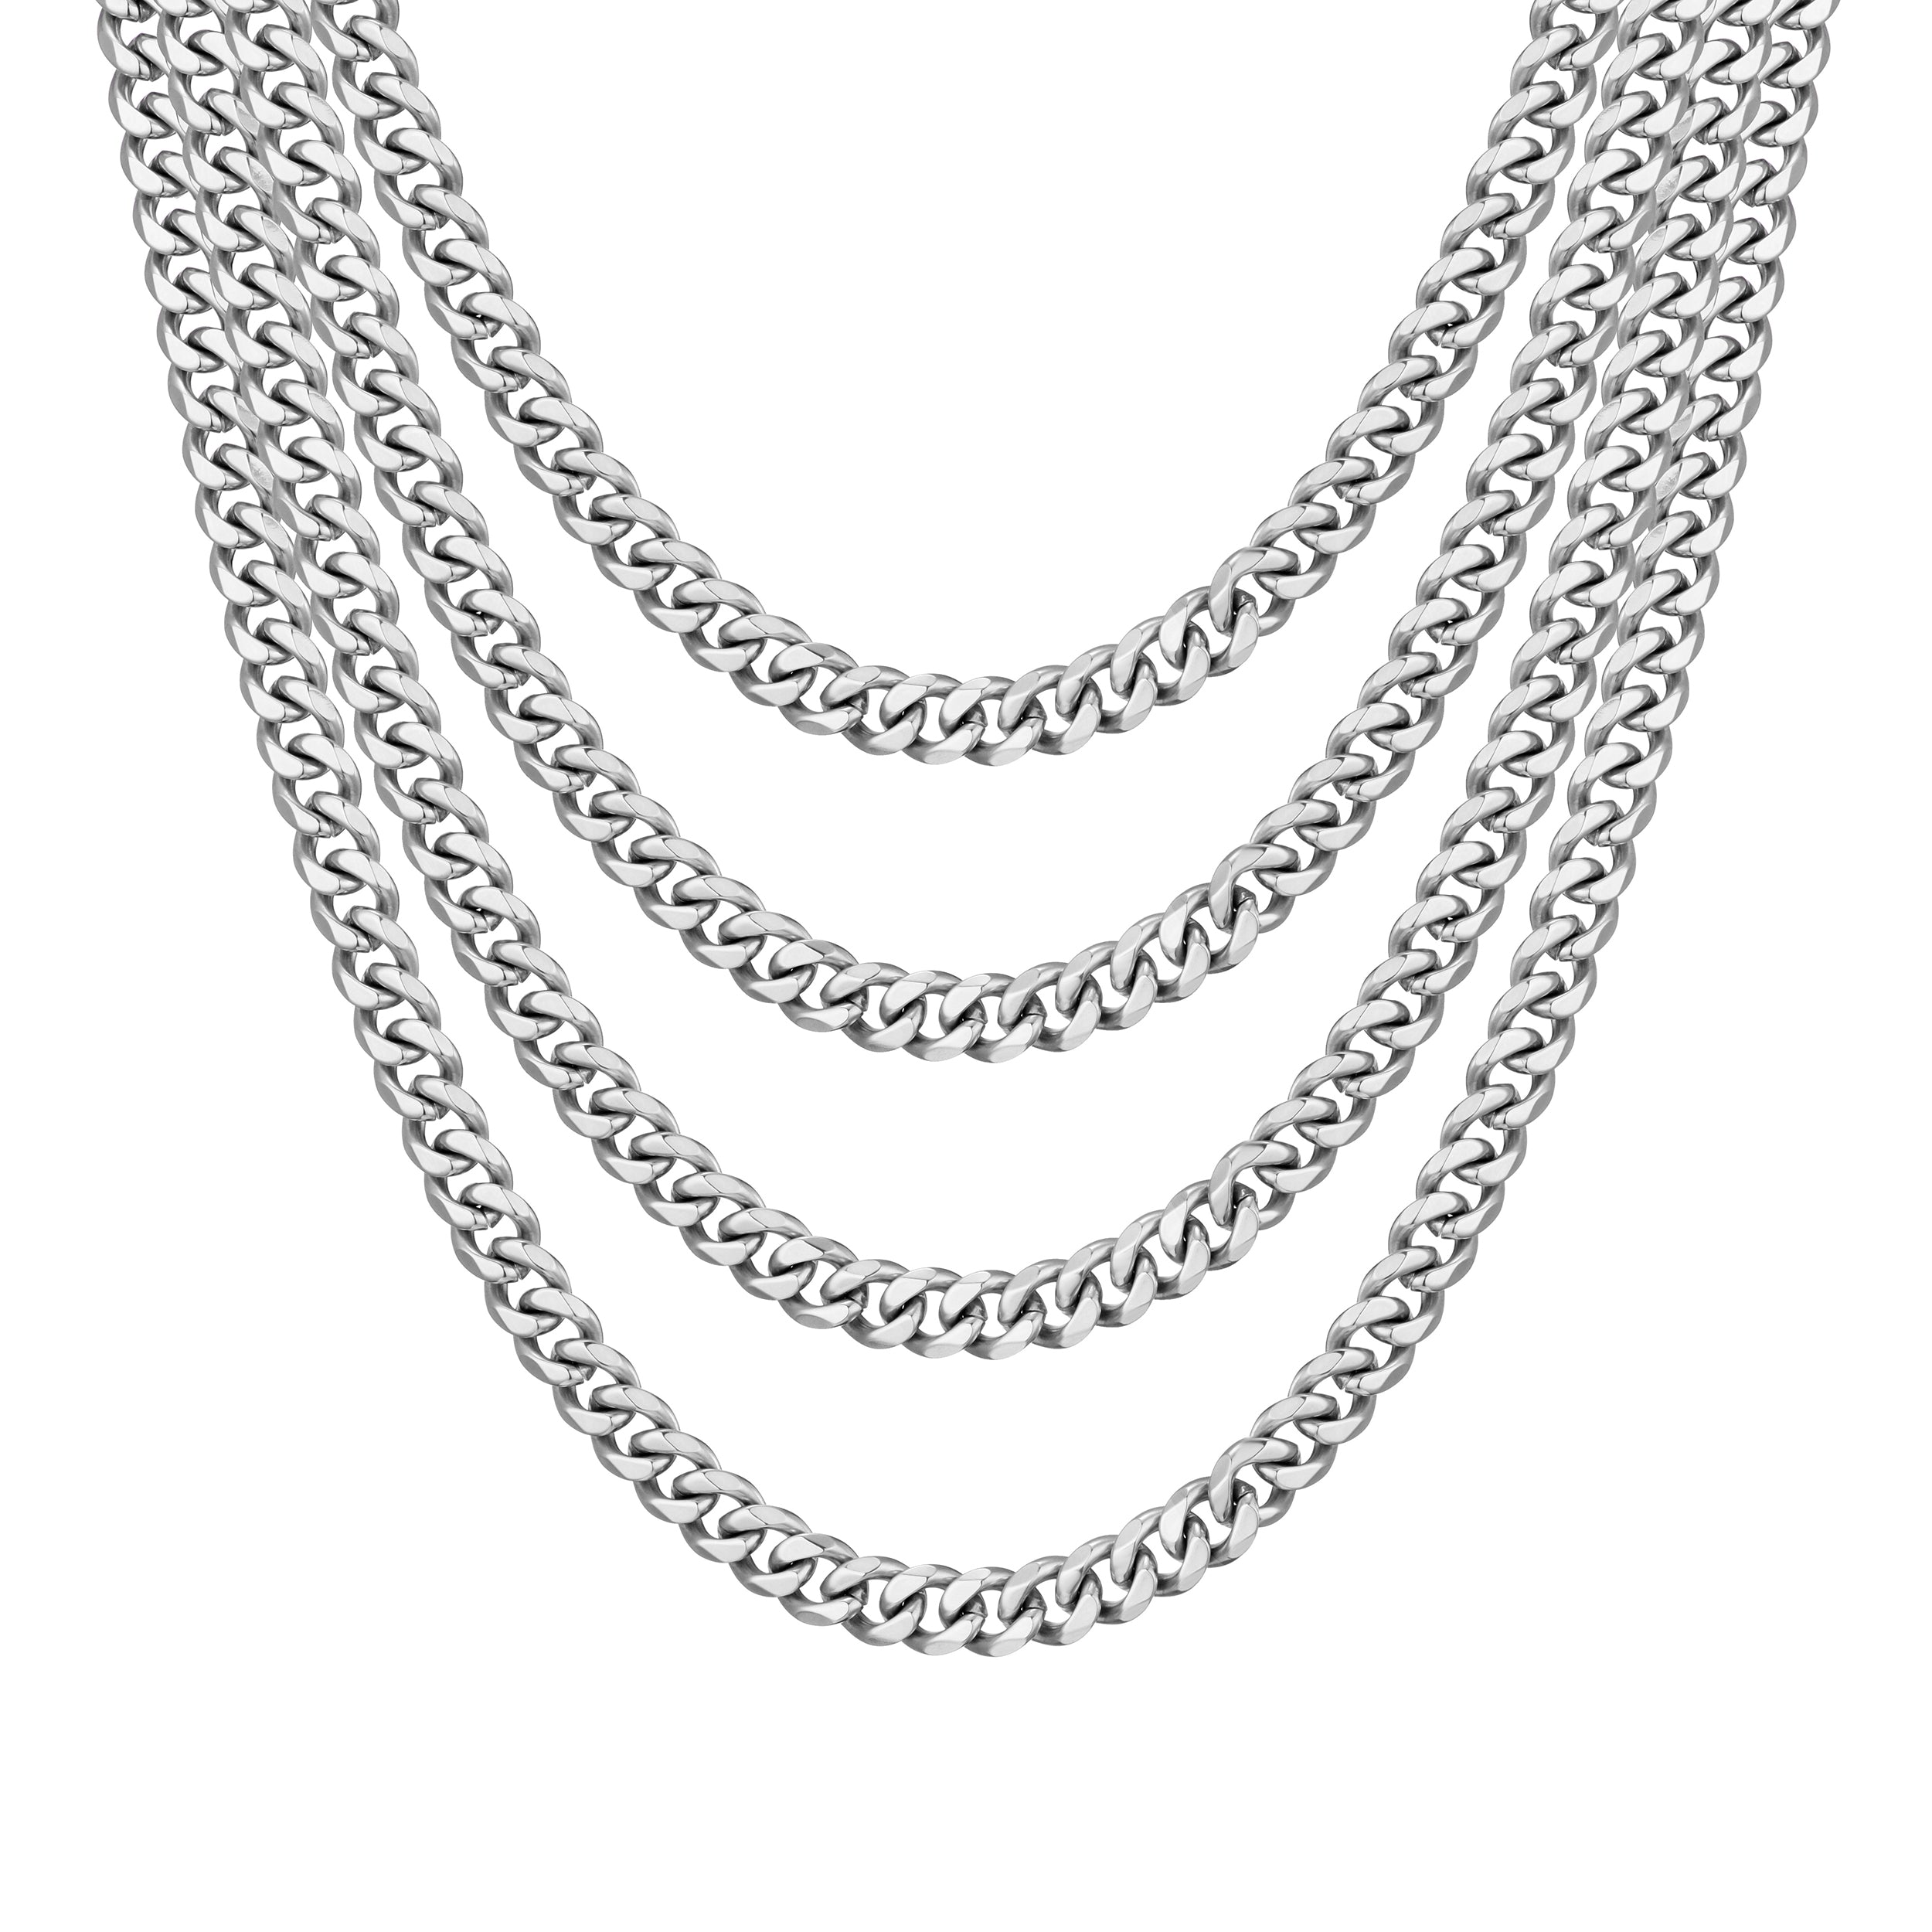 Men's 9mm Stainless Steel 18-24 Inch Curb Chain Necklace